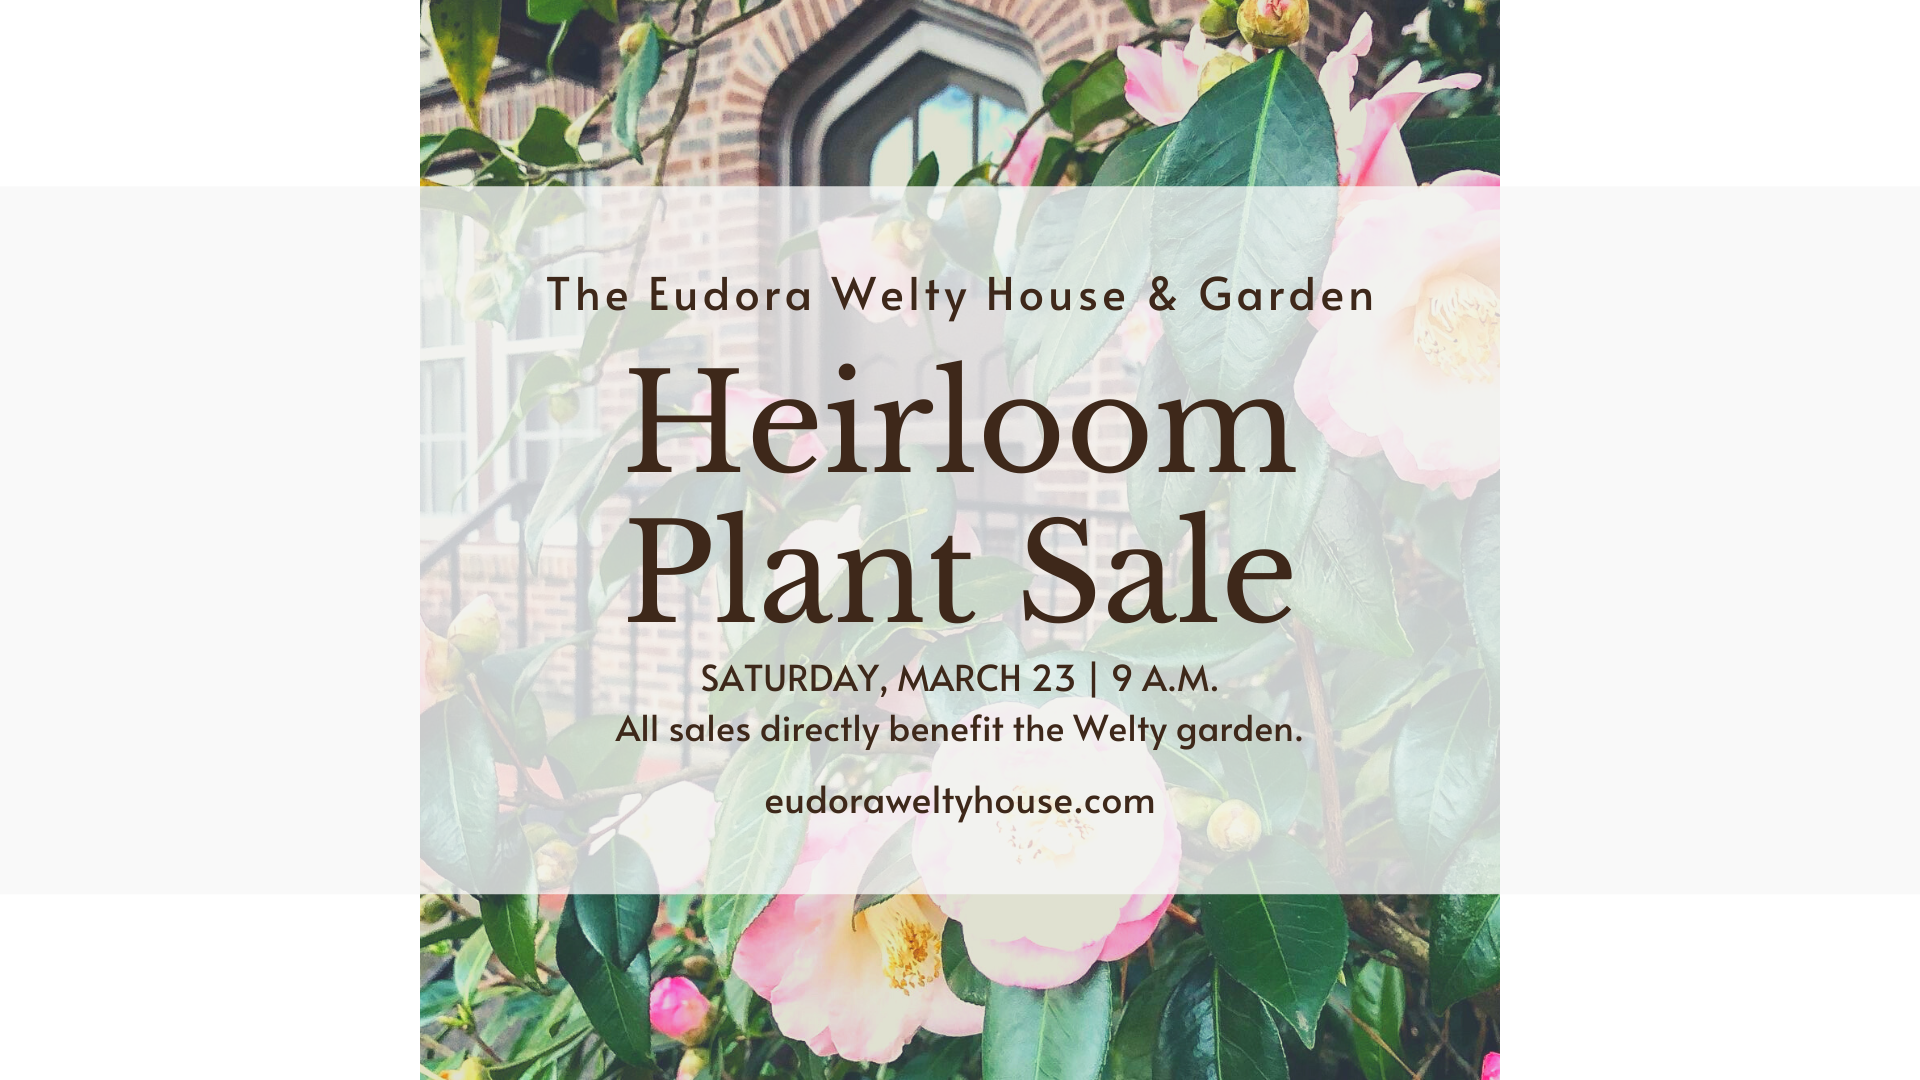 Brown serif text on whitish, translucent background says Heirloom Plant Sale Saturday, March 23, 9 a.m.. Background is a photo of Eudora Welty's front door with pick camellias in bloom.